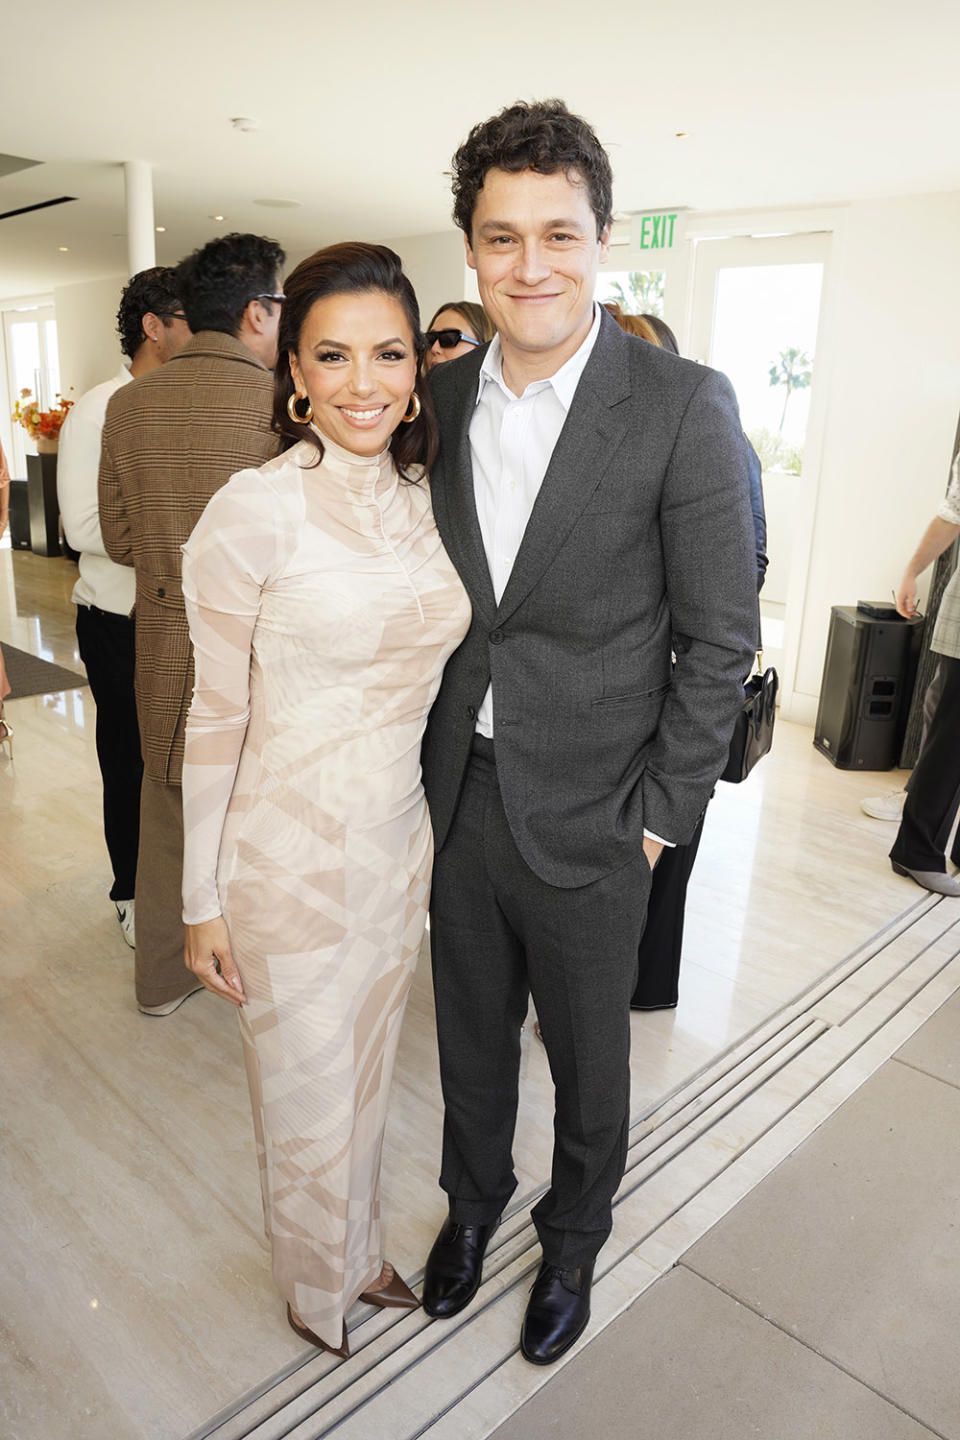 Eva Longoria and Phil Lord pose as Ariana DeBose hosts brunch celebrating Eva Longoria's directorial debut for "Flamin' Hot" at Mandarin Oriental Residences Beverly Hills on January 13, 2024 in Beverly Hills, California.